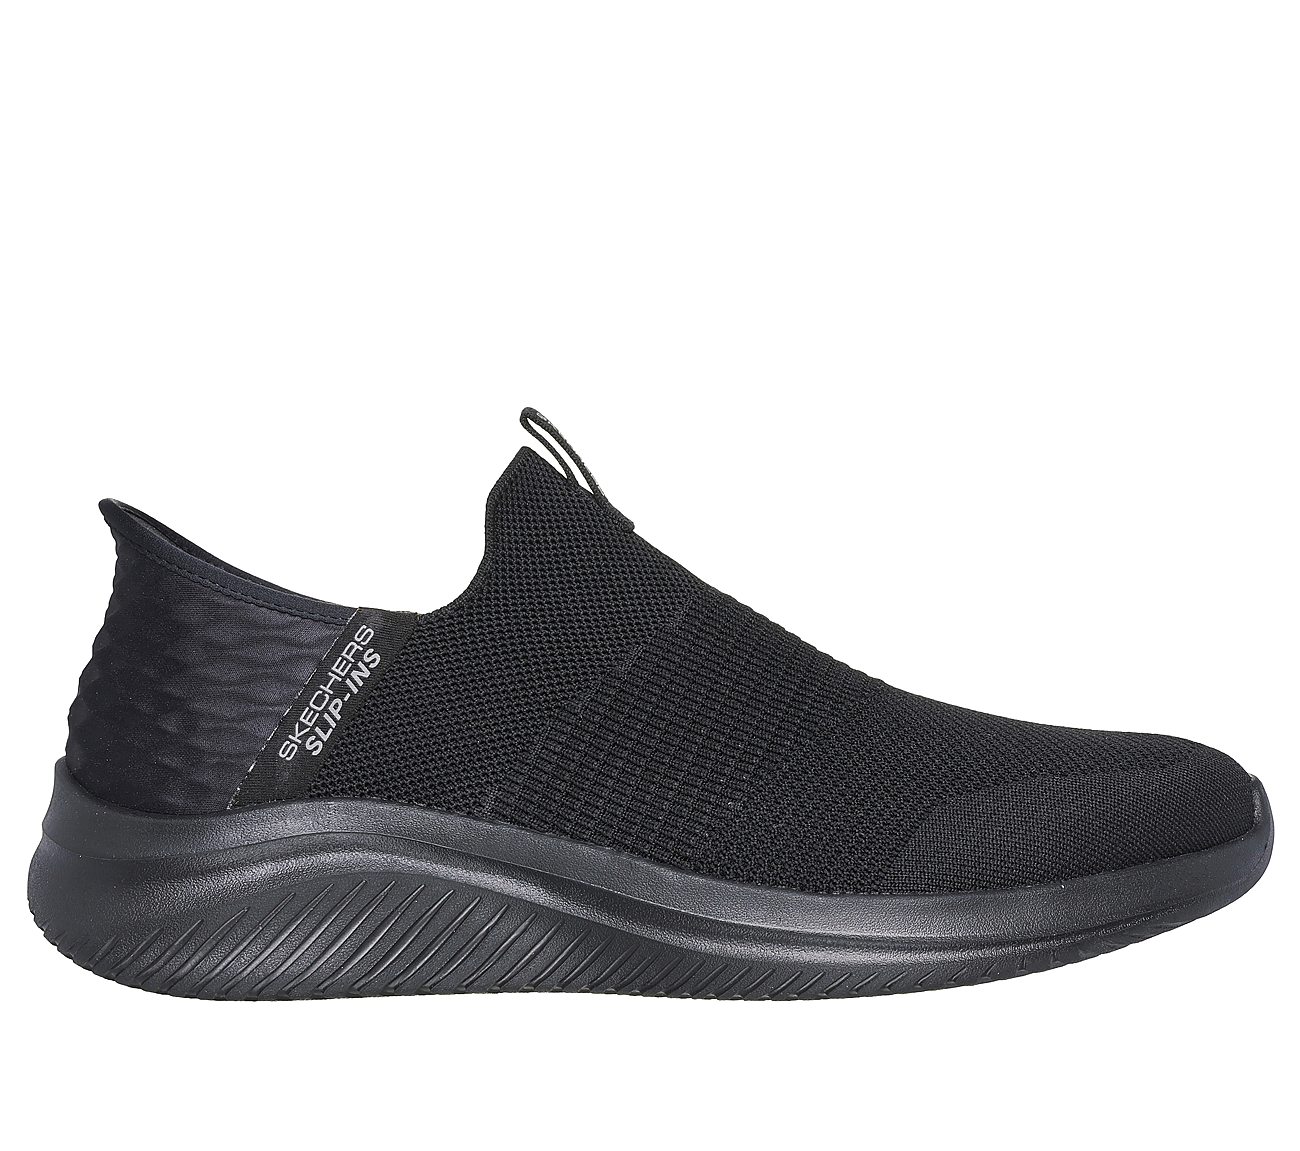 SKECHERS SLIP-INS: ULTRA FLEX 3.0 - SMOOTH STEP, BBLACK Footwear Lateral View